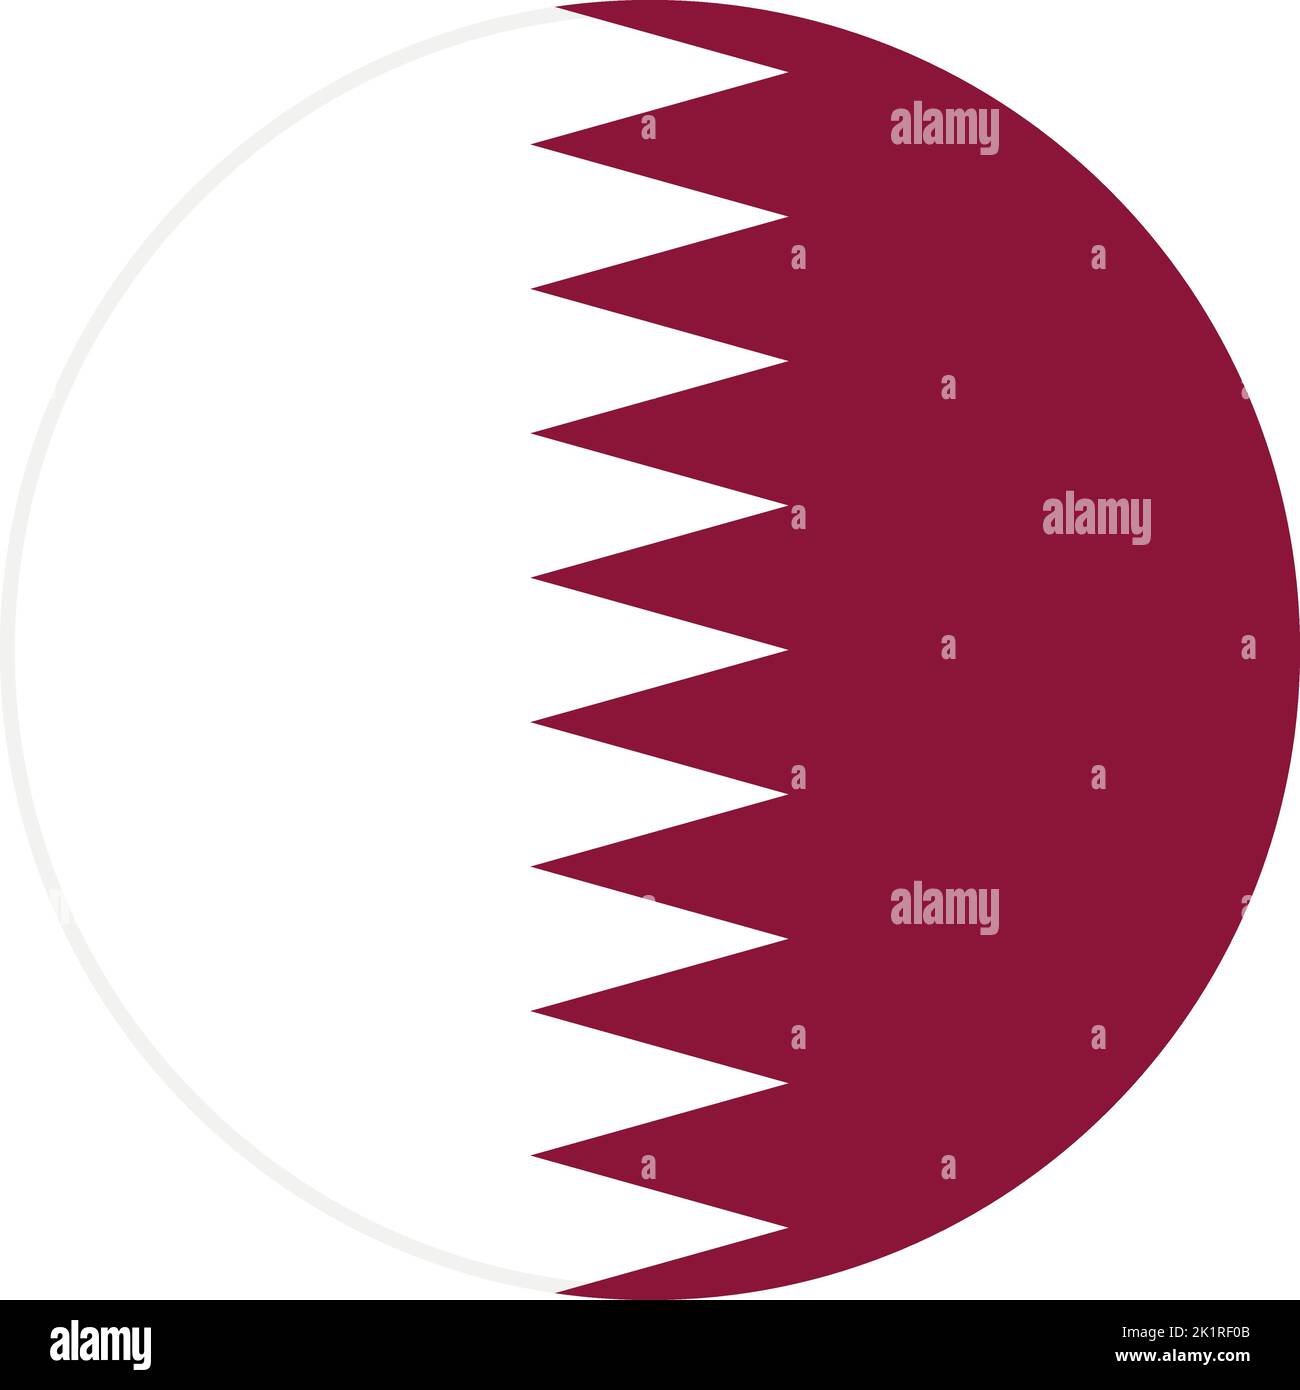 State of qatar emblem Stock Vector Images - Alamy